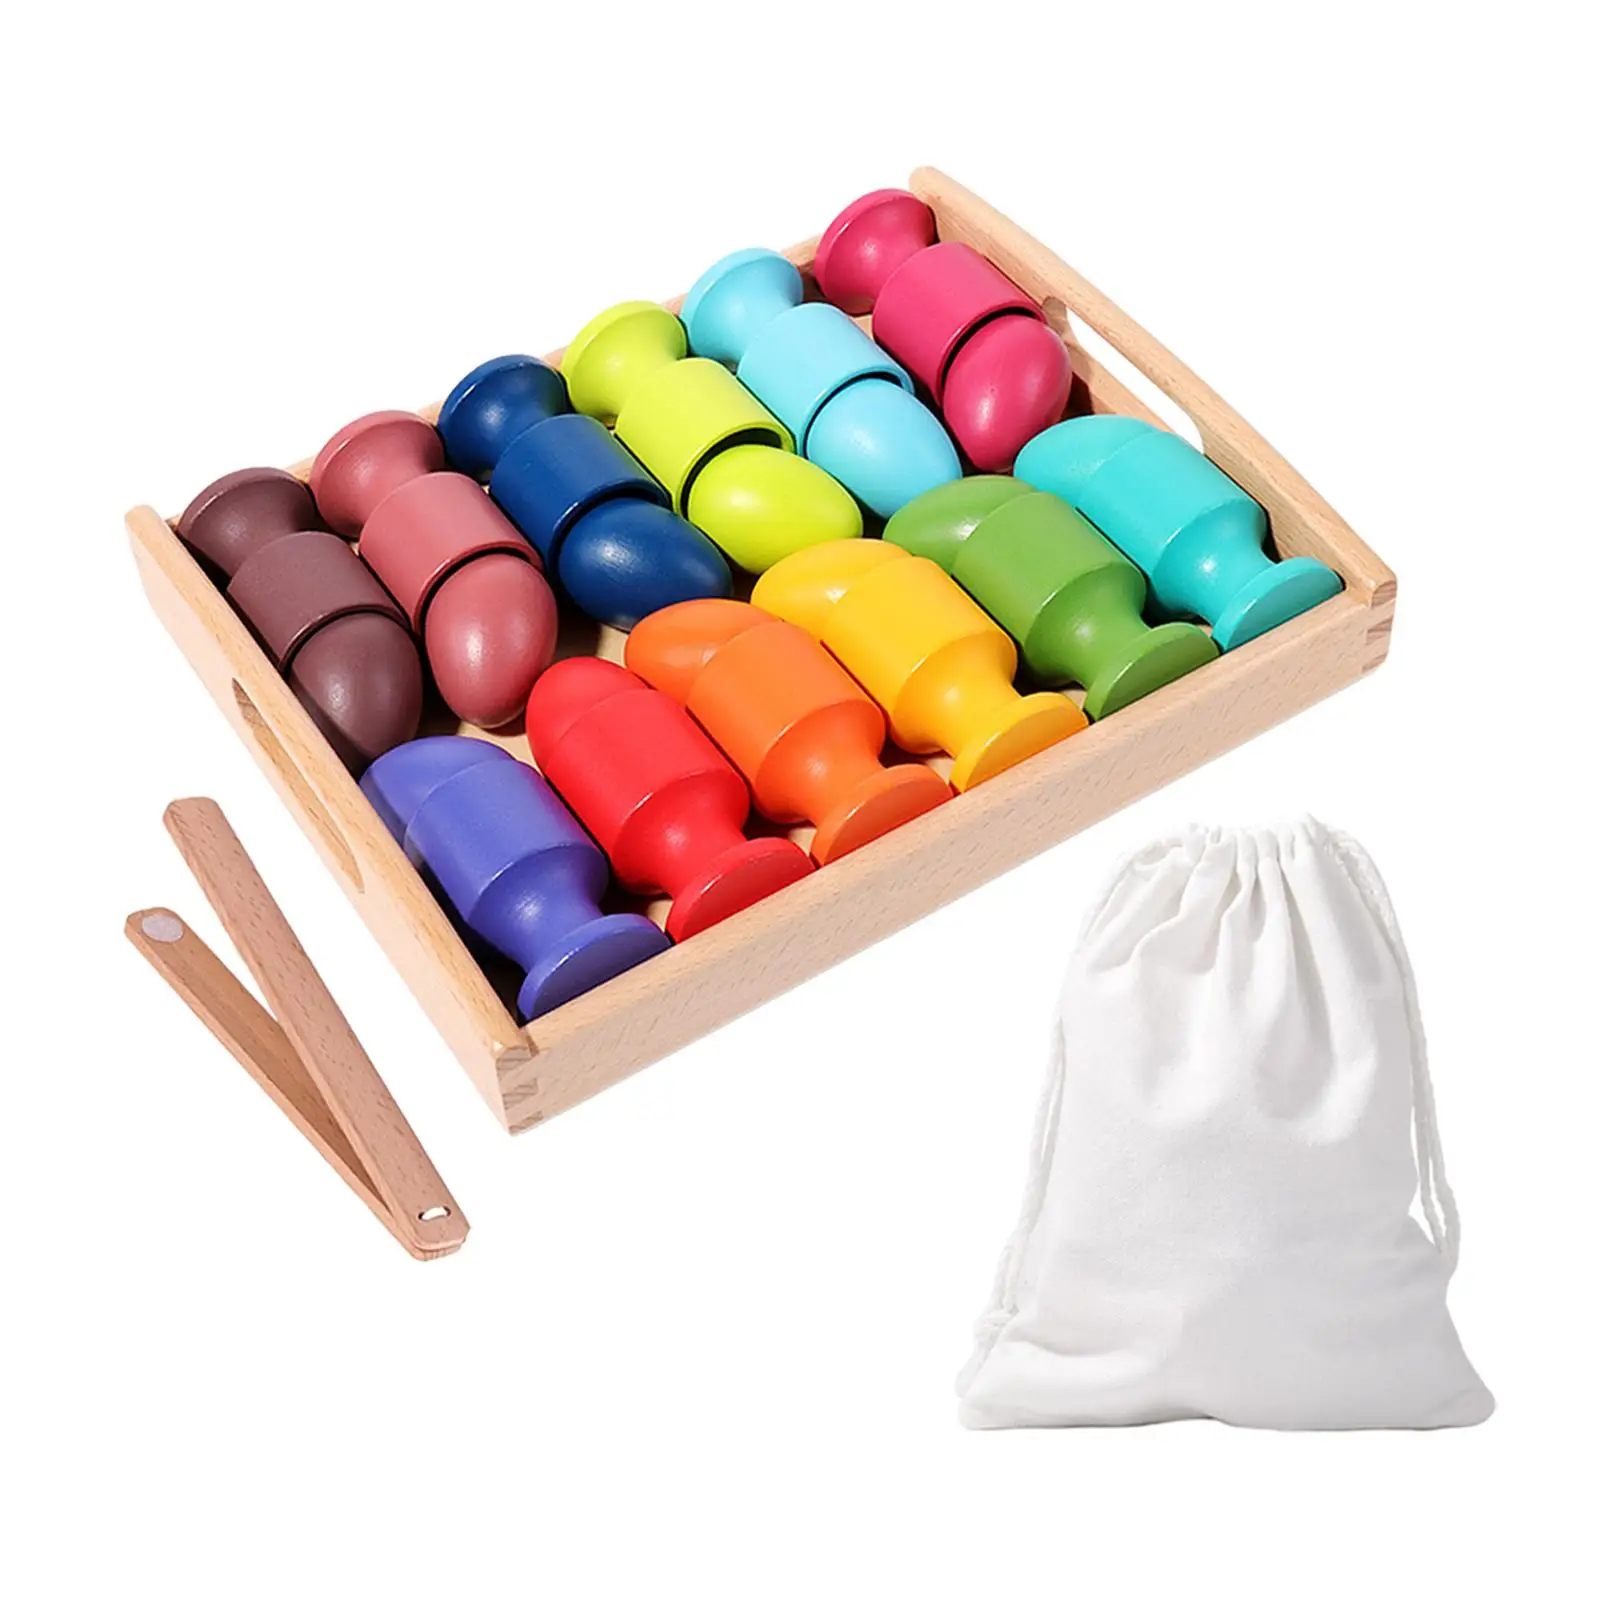 Montessori Color Recognition Fine Motor Wooden Sorter Game Egg Balls in Cups for Toddlers Kids Baby Children Counting Toys